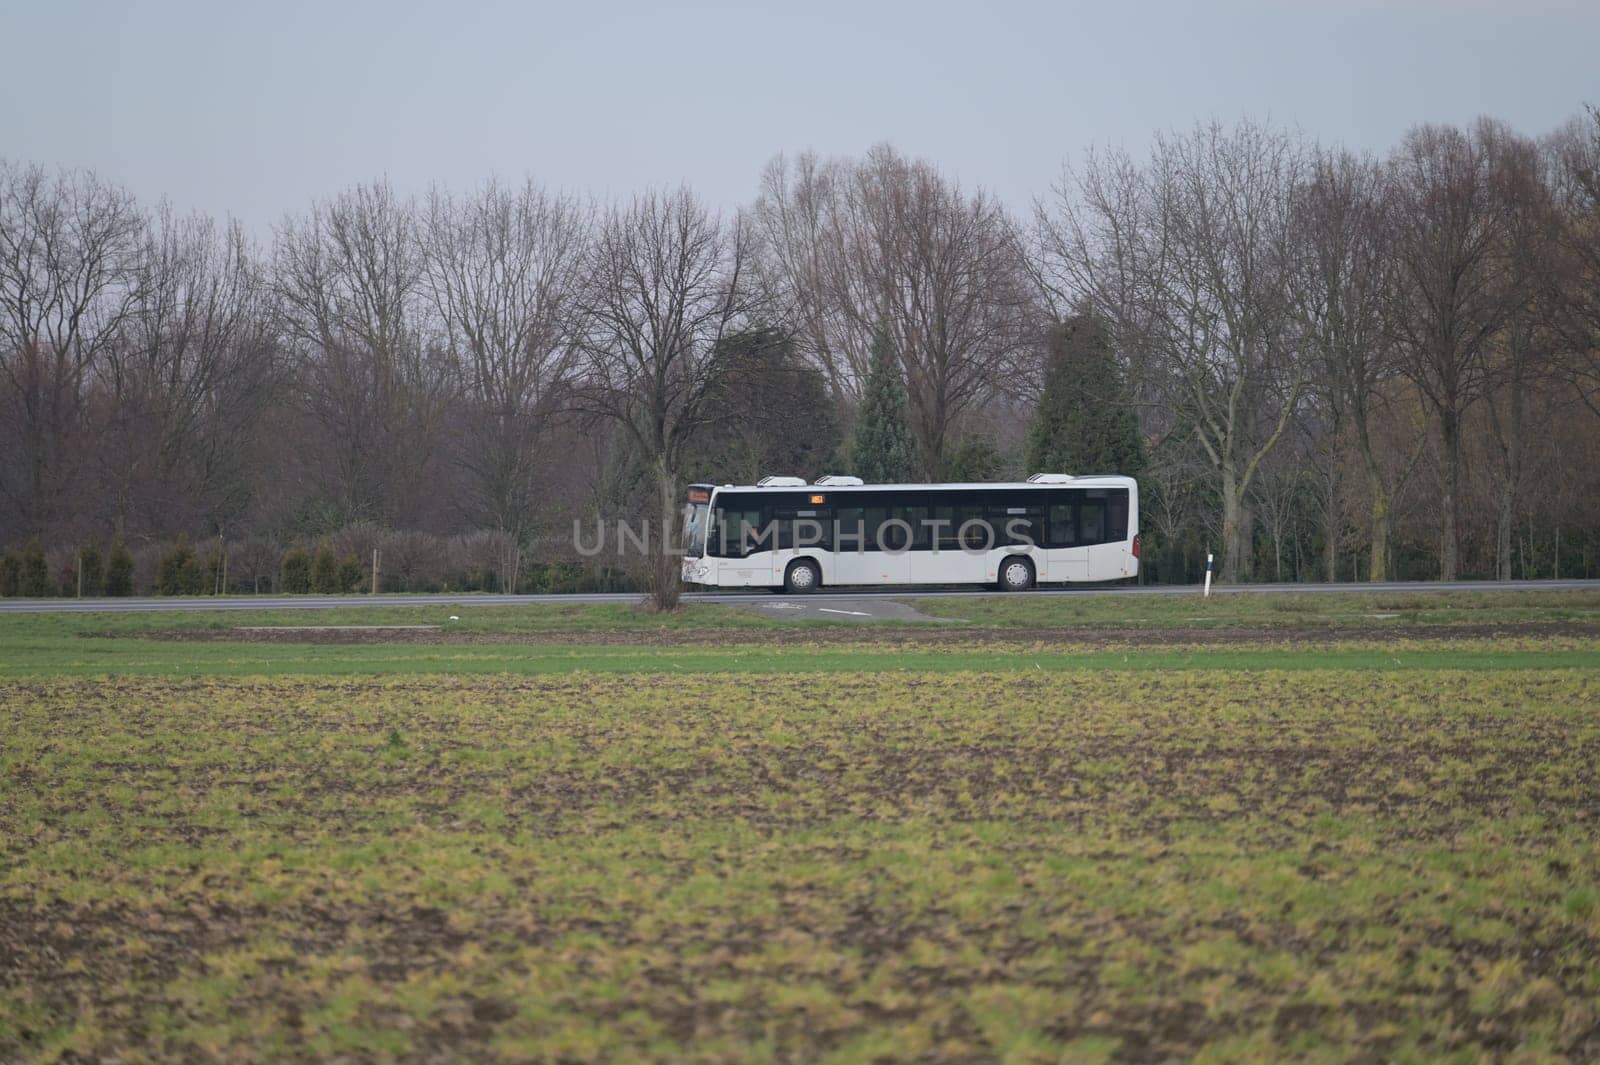 German express bus SB51 on country road near Meerbusch in Germany